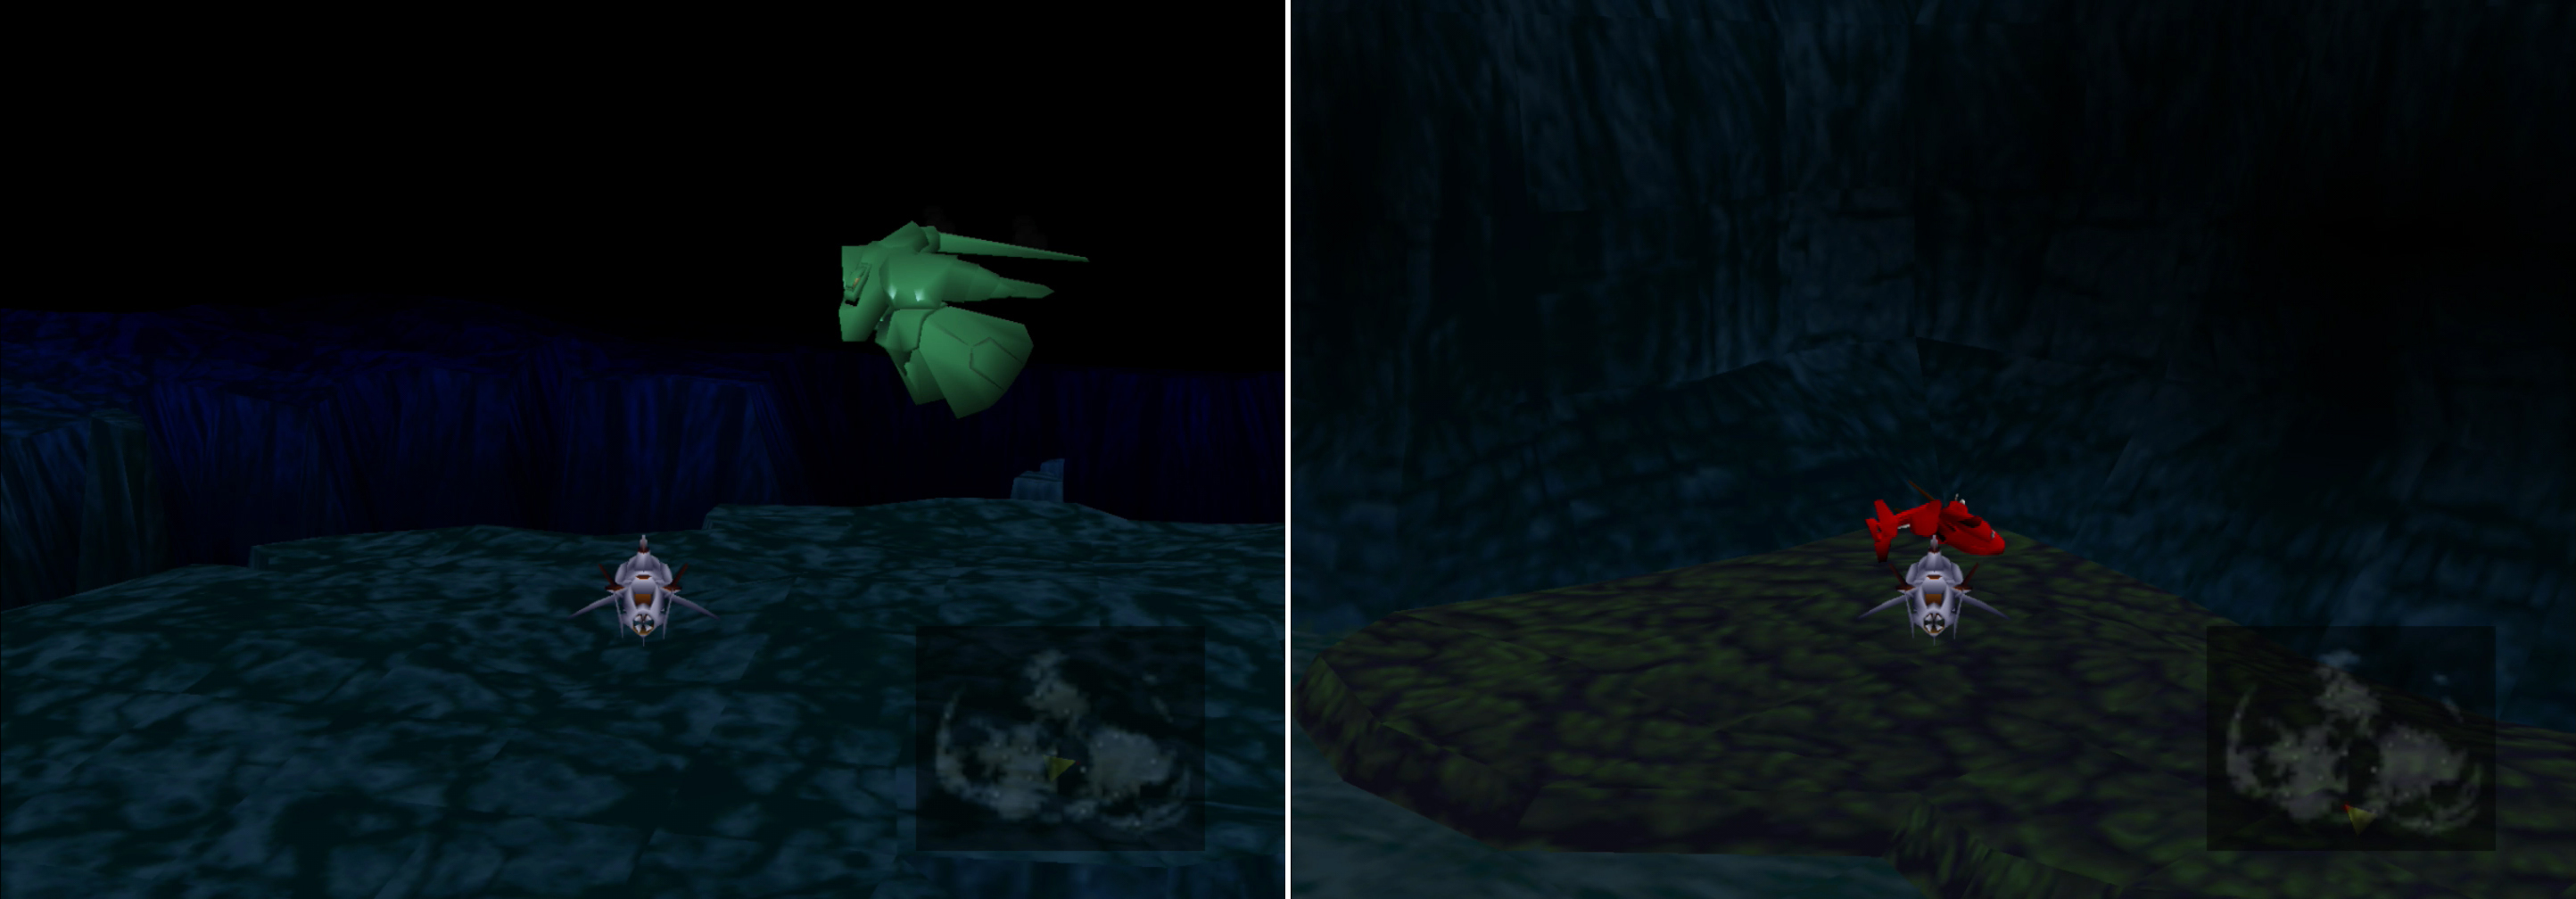 No, it's not a giant gold fish, it's Emerald Weapon, a superboss. Avoid it at all costs (left). Locate the red Shinra submarine you sunk earlier to recover the Huge Materia it was carrying (right).